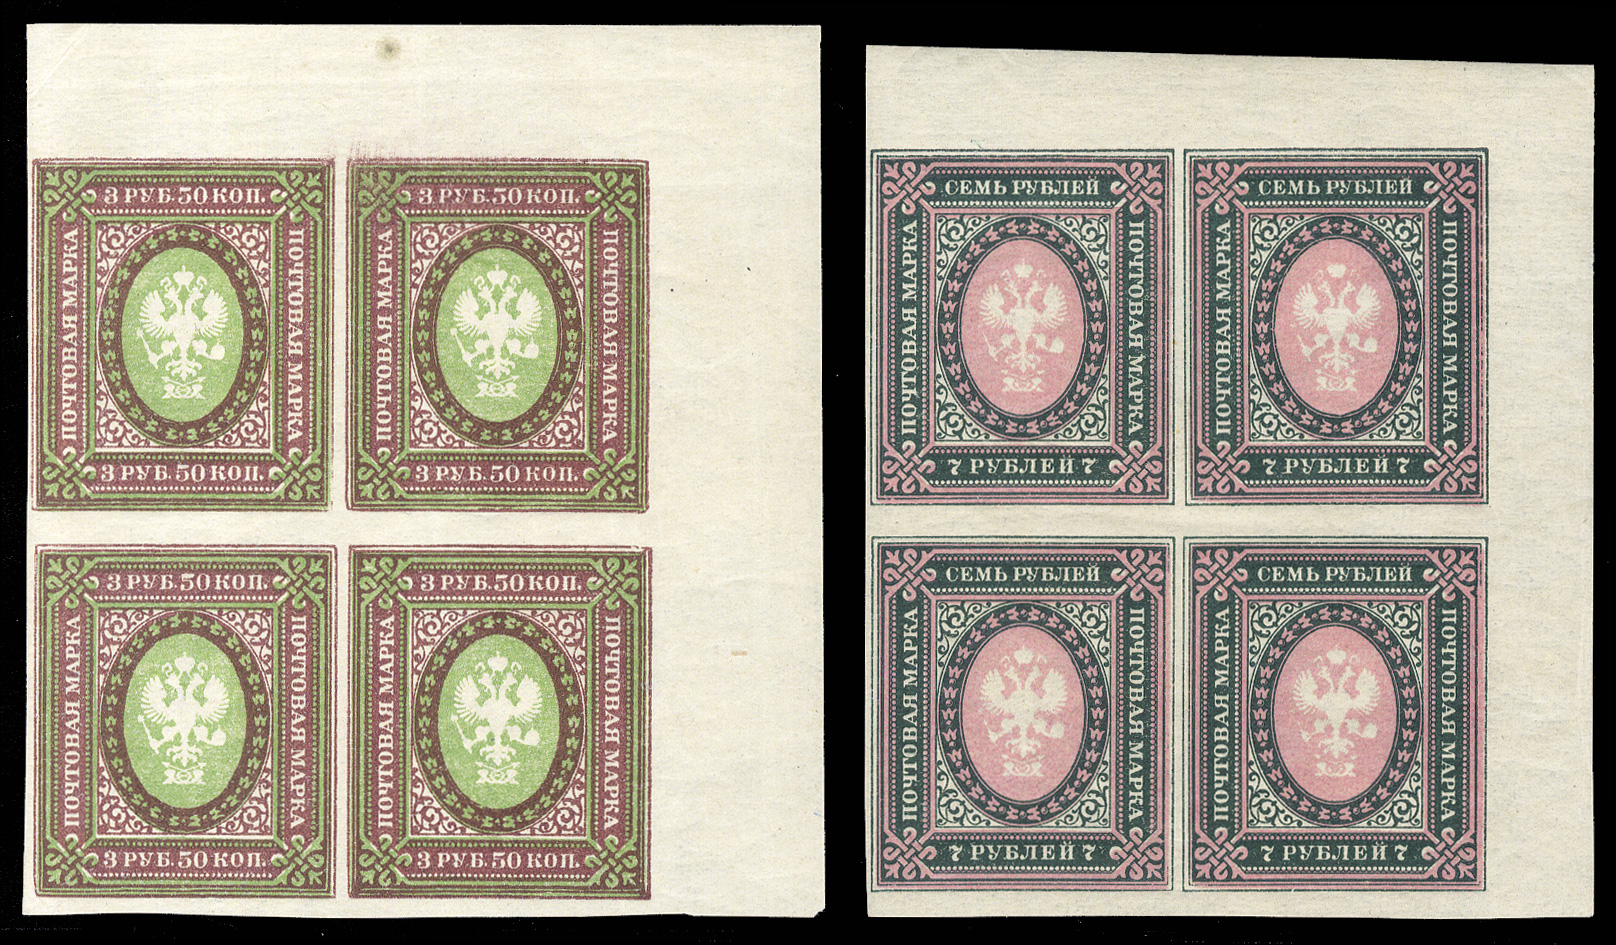 1919 (horizontal lozenges) 3.50r and 7r imperforate upper right sheet corner blocks of four, n.h. and post office fresh, v.f., 7r with 1998 Mandrovski certificate. One of only three sets of blocks recorded. (Zverev CV $35,000)